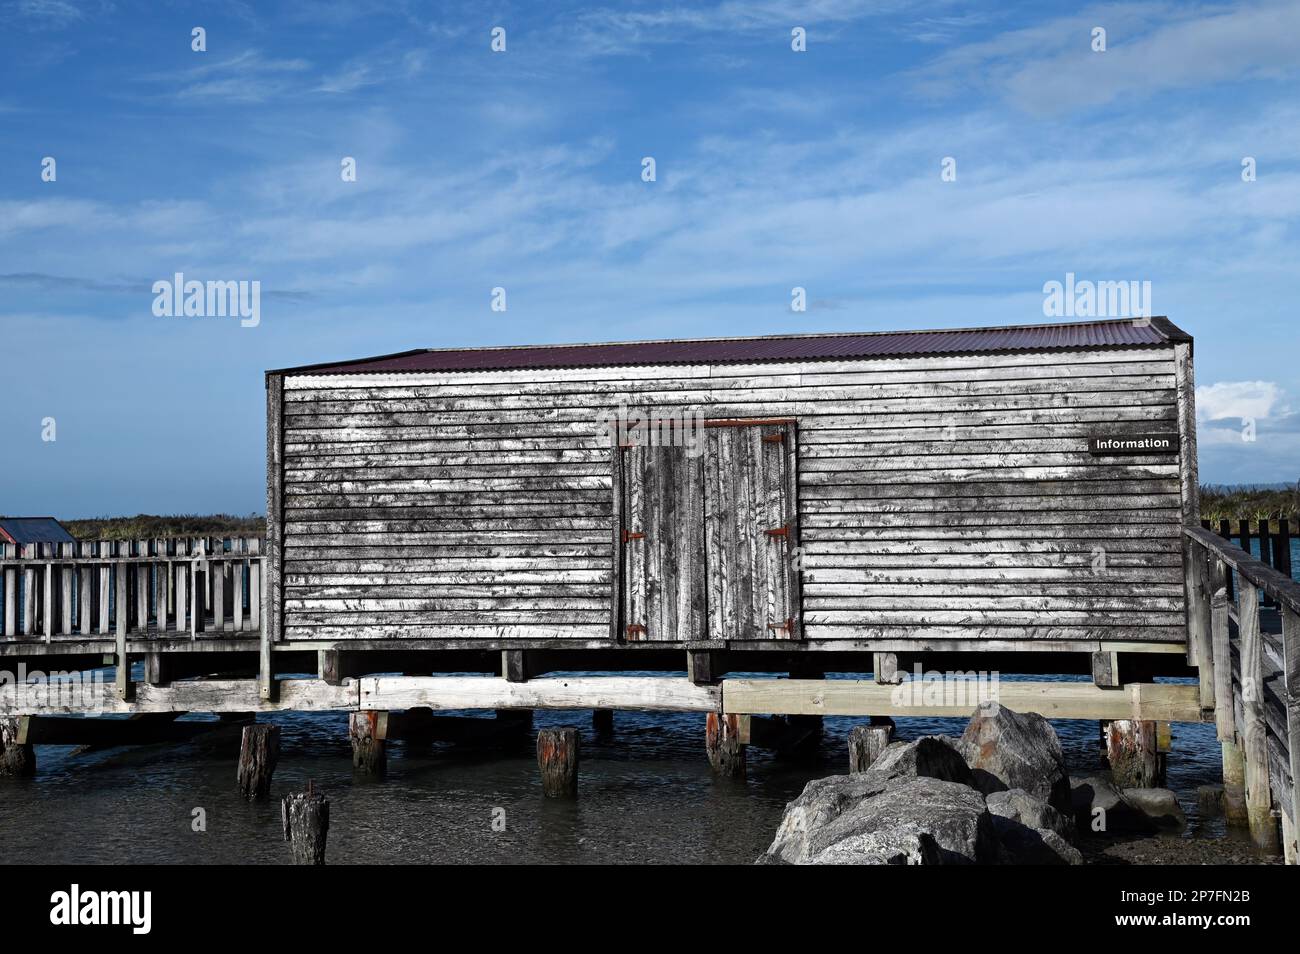 The wharf, jetty and boat house at the West Coast settlement of Okarito. During the 1860s gold rush Okarito saw 500 plus miners disembark in one day. Stock Photo